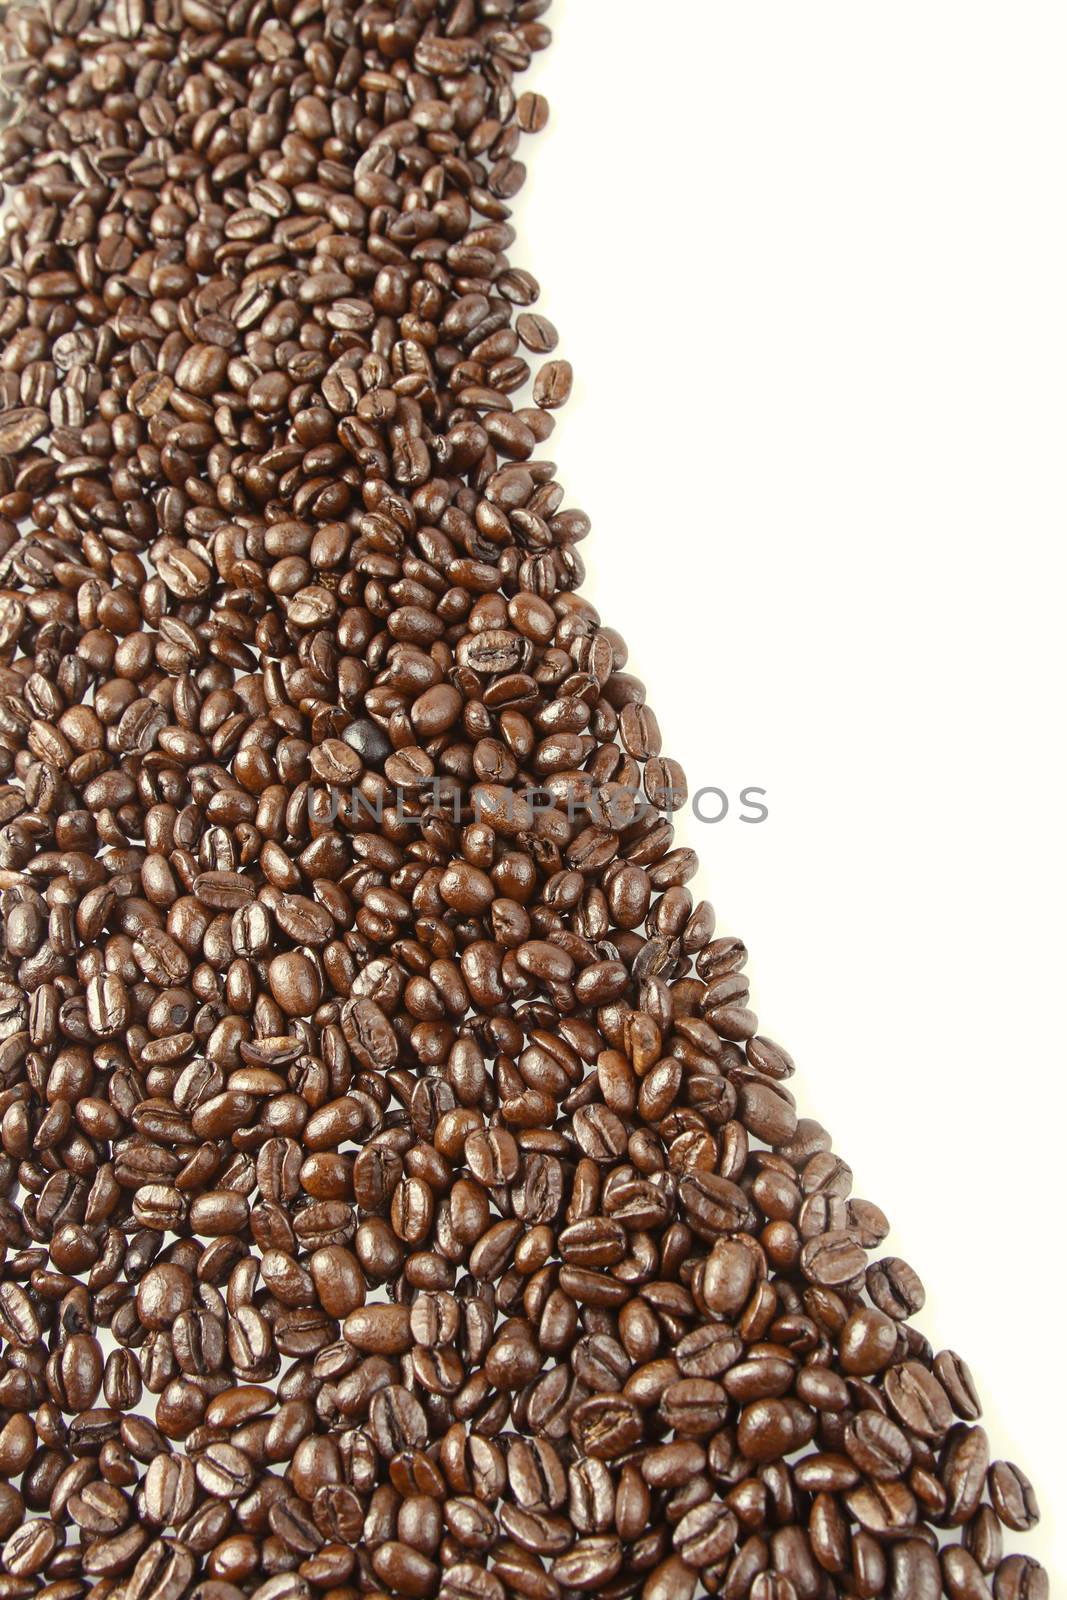 Closeup of coffee beans on plain background. Copy space